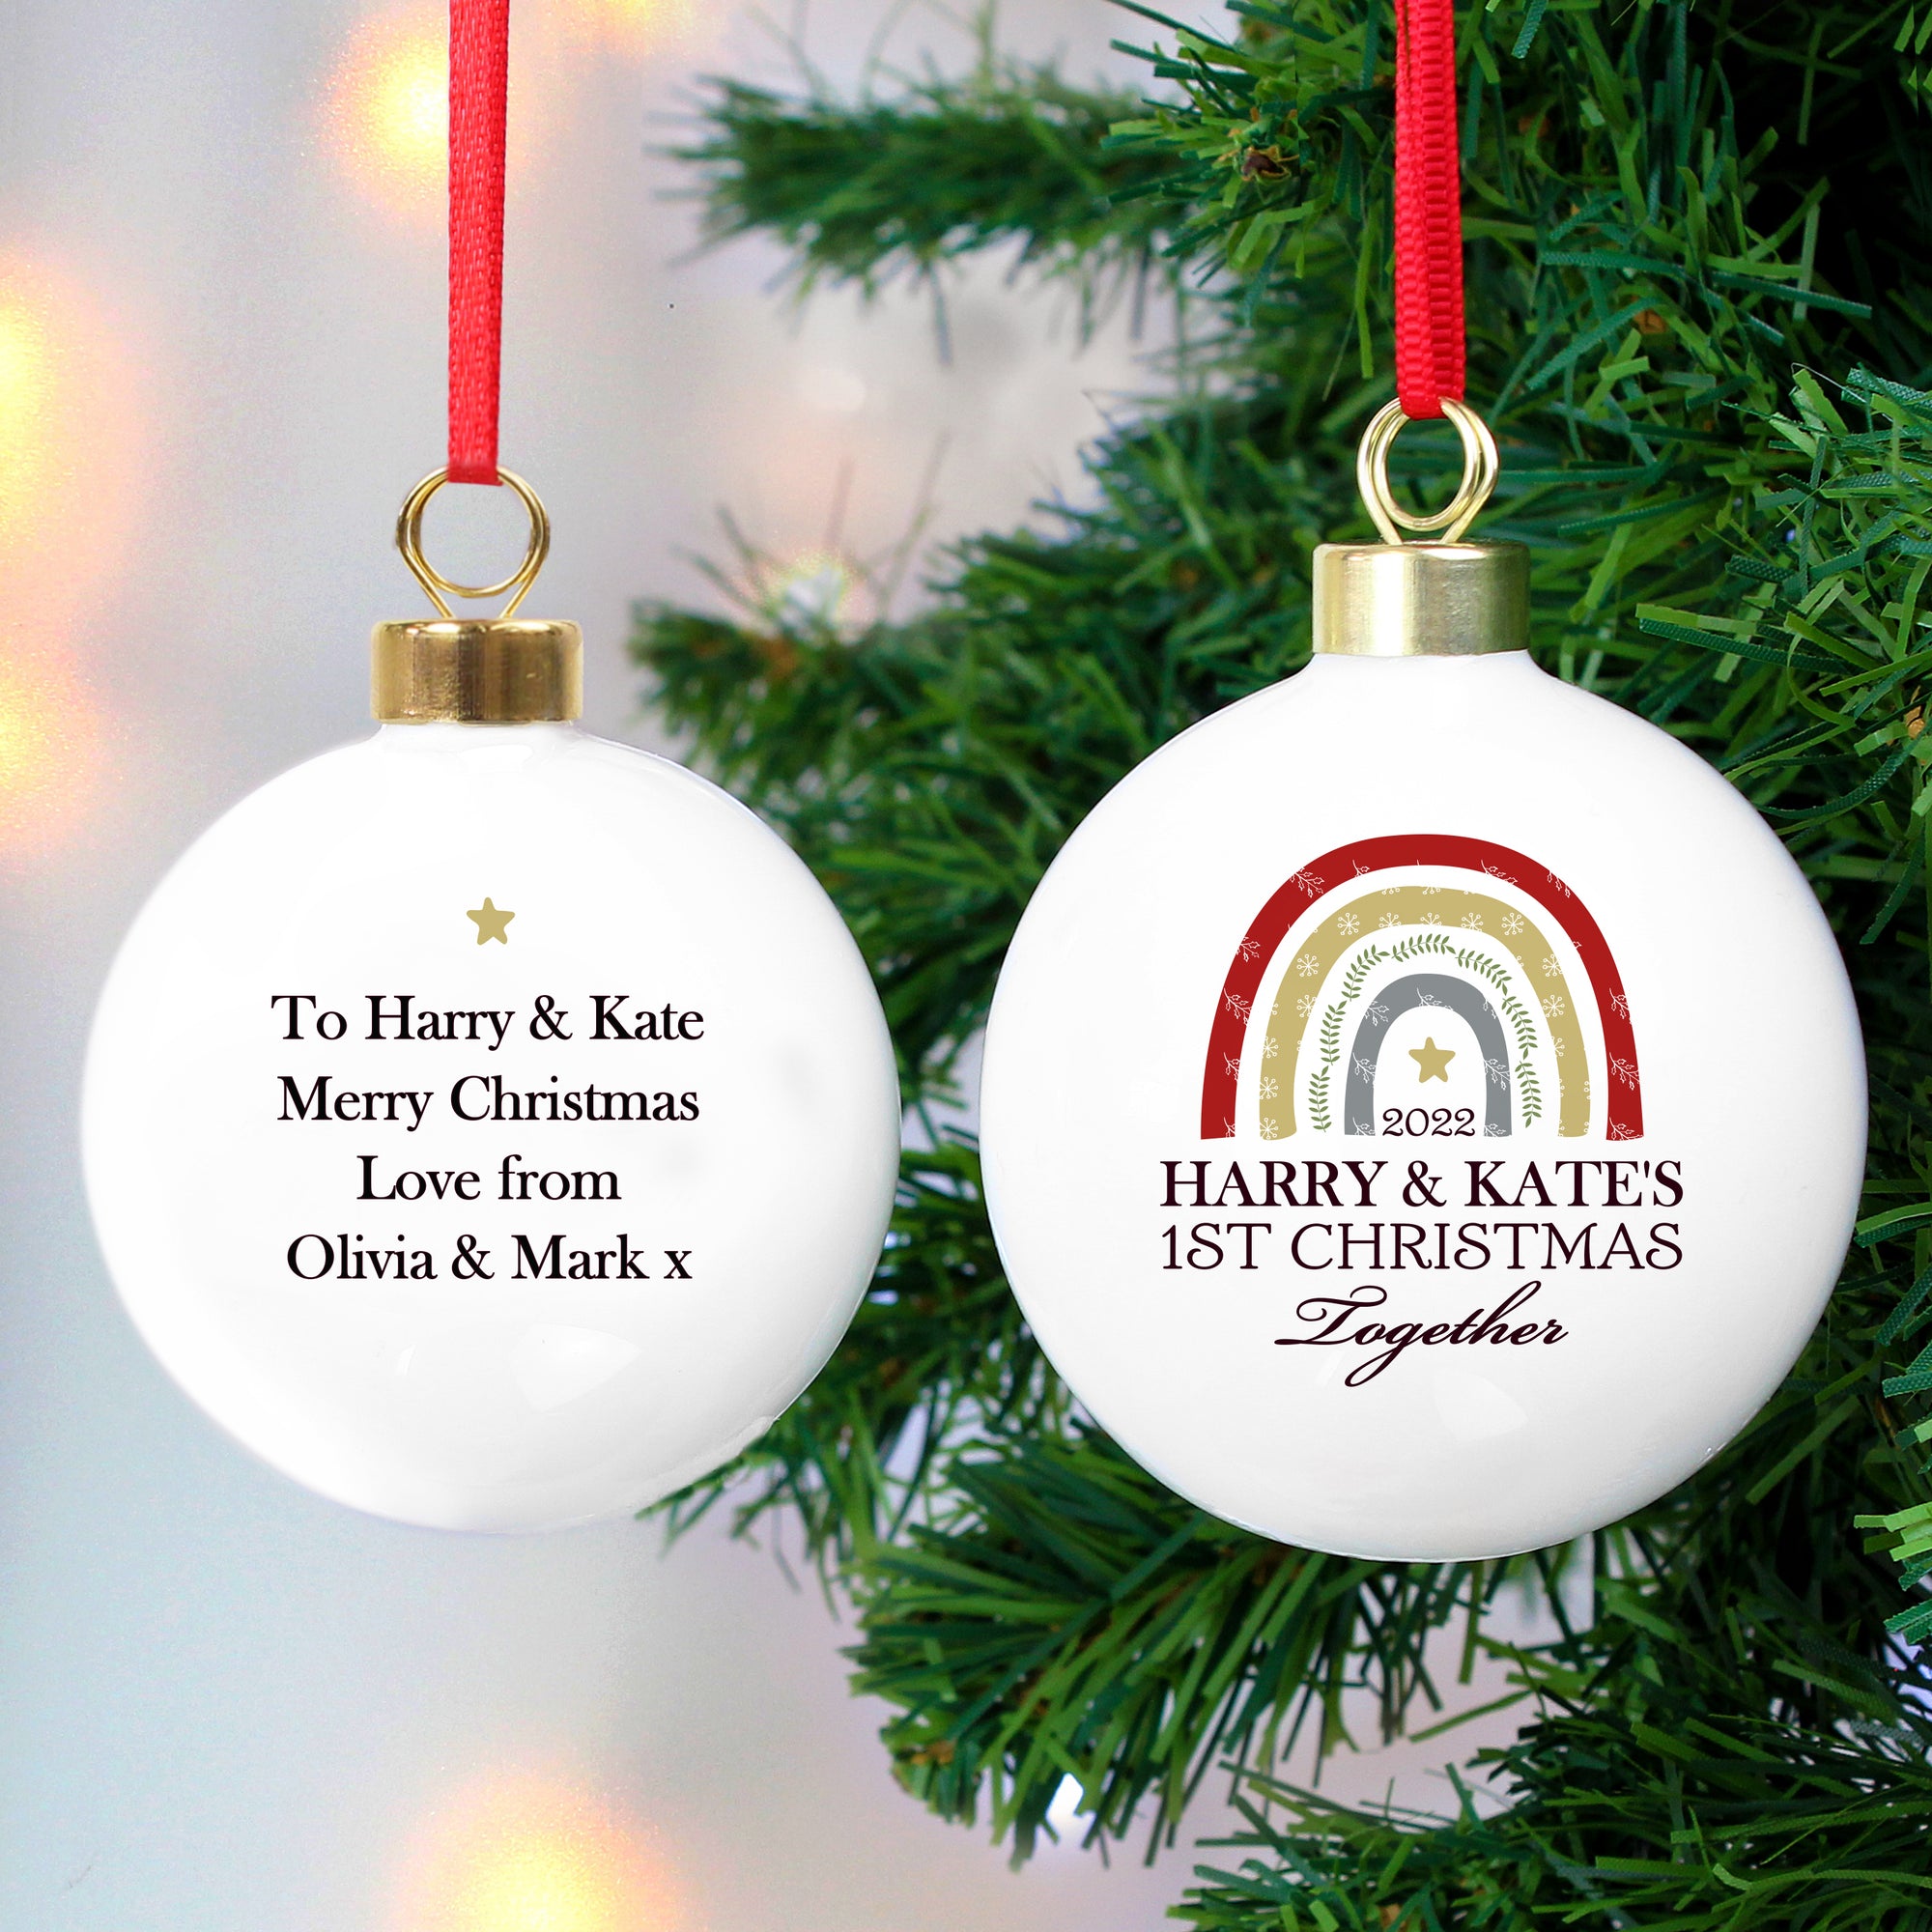 Personalised Christmas bauble. The front of the bauble features a rustic looking rainbow over a gold star. The front of the bauble can be personalised with a year (optional) and your own text over 3 lines. The rear of the bauble can be personalised with your own special message over up to 4 lines. The bauble is made from white ceramic and measures approximately 6 cm across.